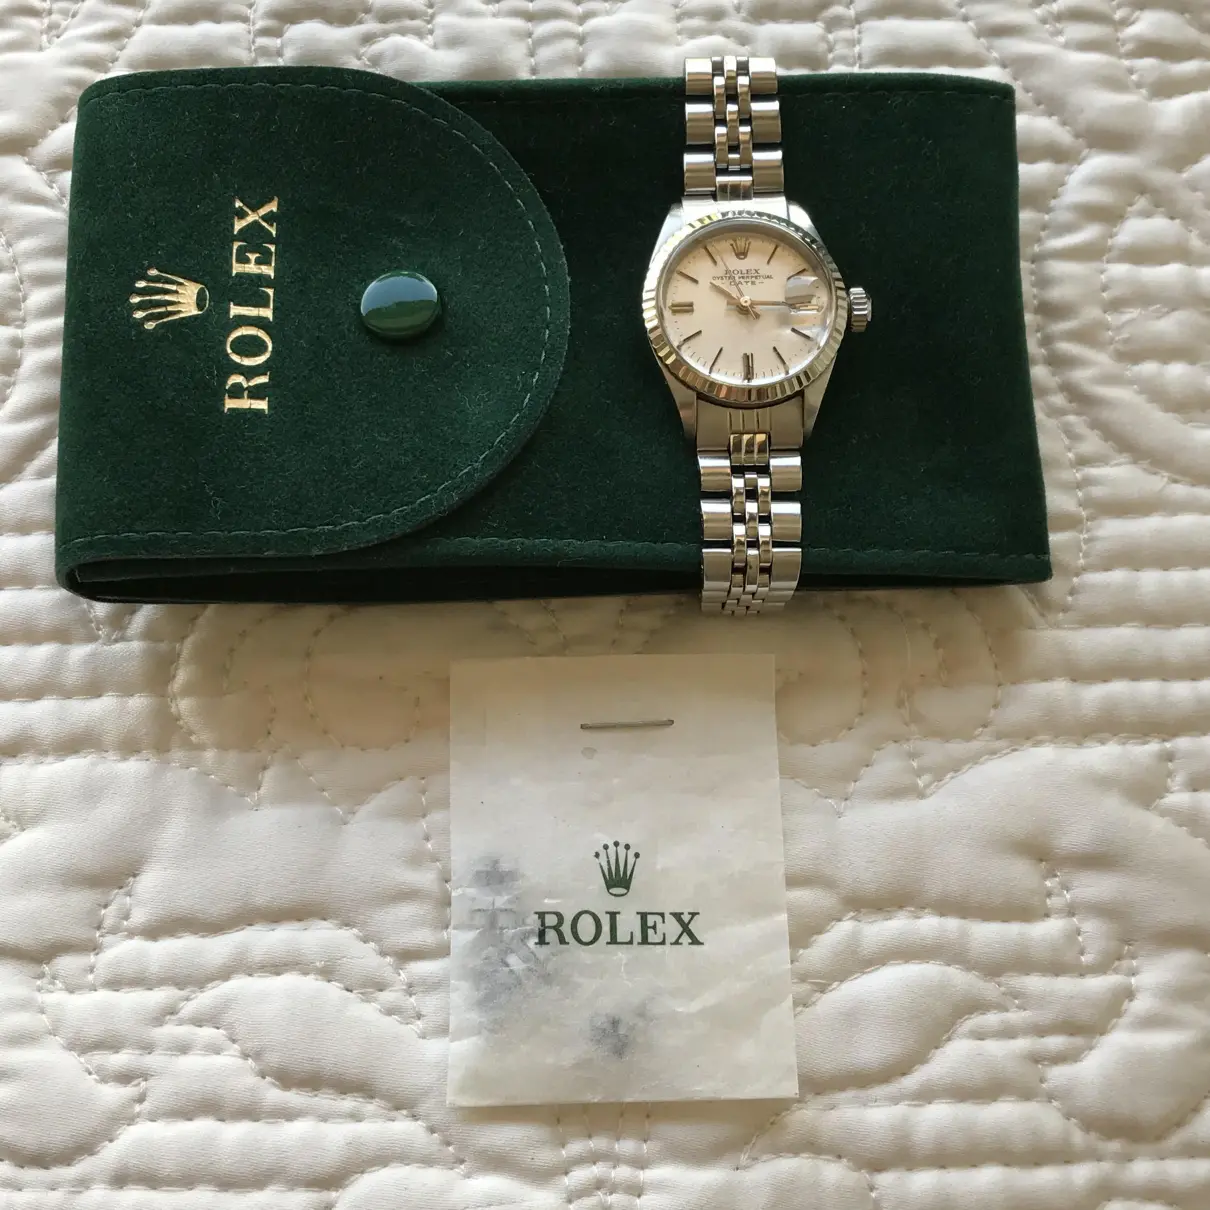 Lady Oyster Perpetual 24mm watch Rolex